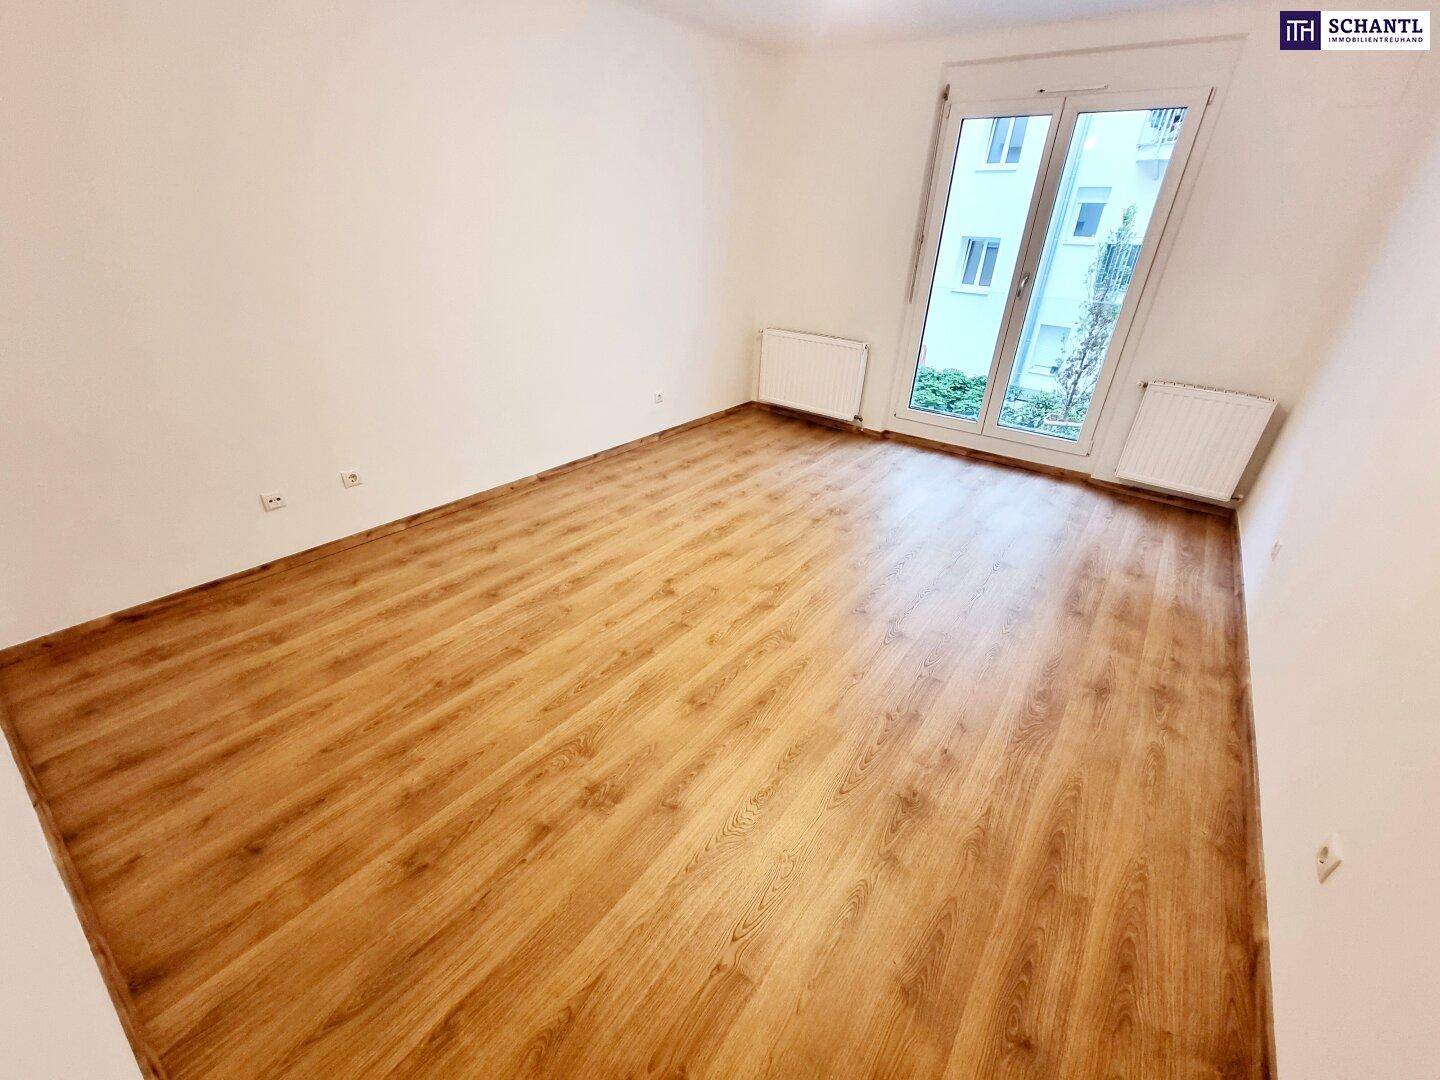 https://pictures.immobilienscout24.de/prod.www.immobilienscout24.at/pictureserver/loadPicture?q=70&id=012.0012000001E83jZ-1715045677-a7ca2c5a9f0947308b8bf5762aac5c13